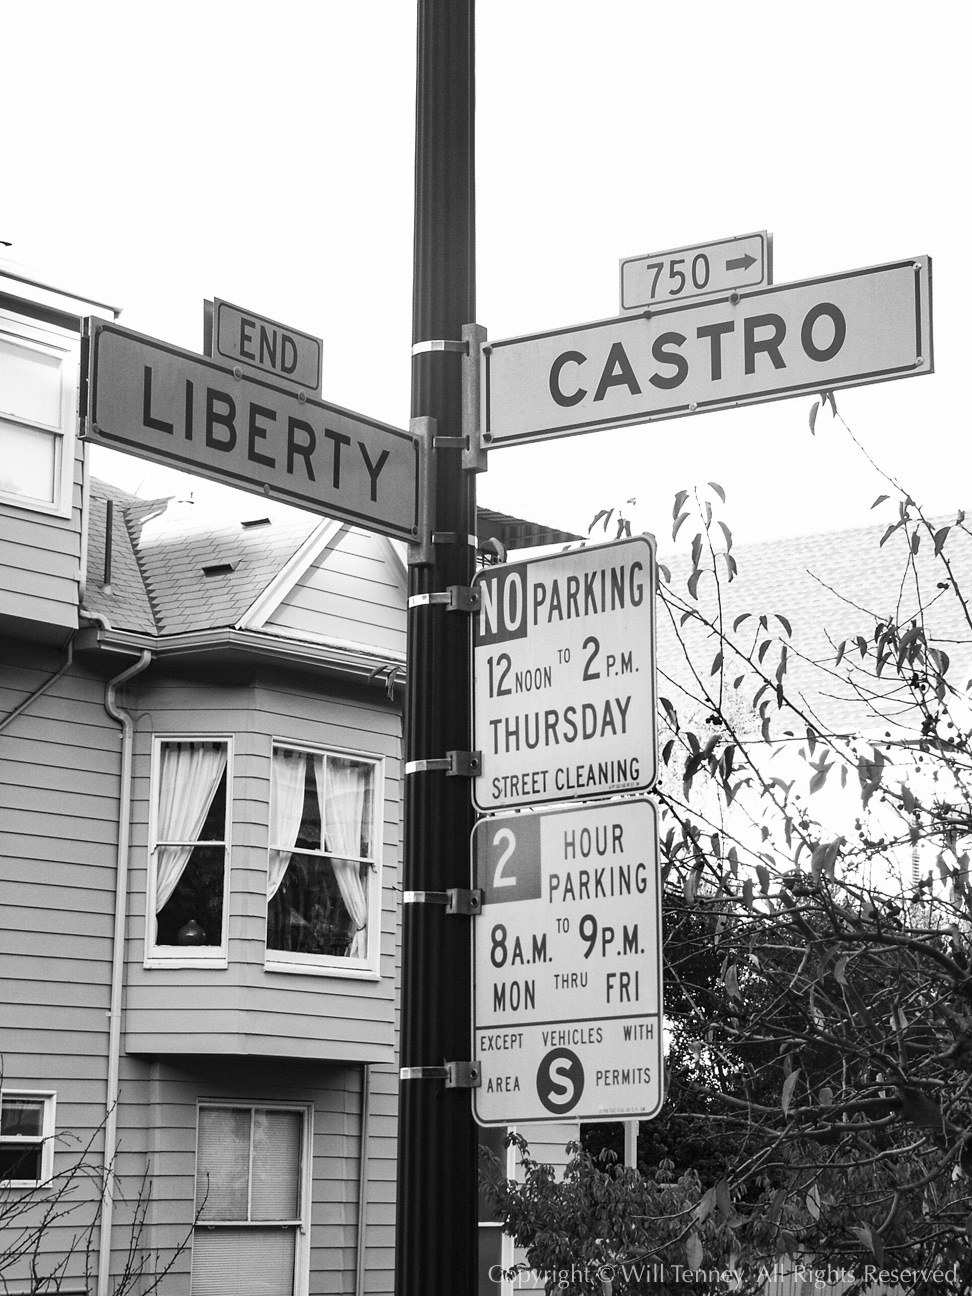 End Liberty Castro: Photograph by Will Tenney